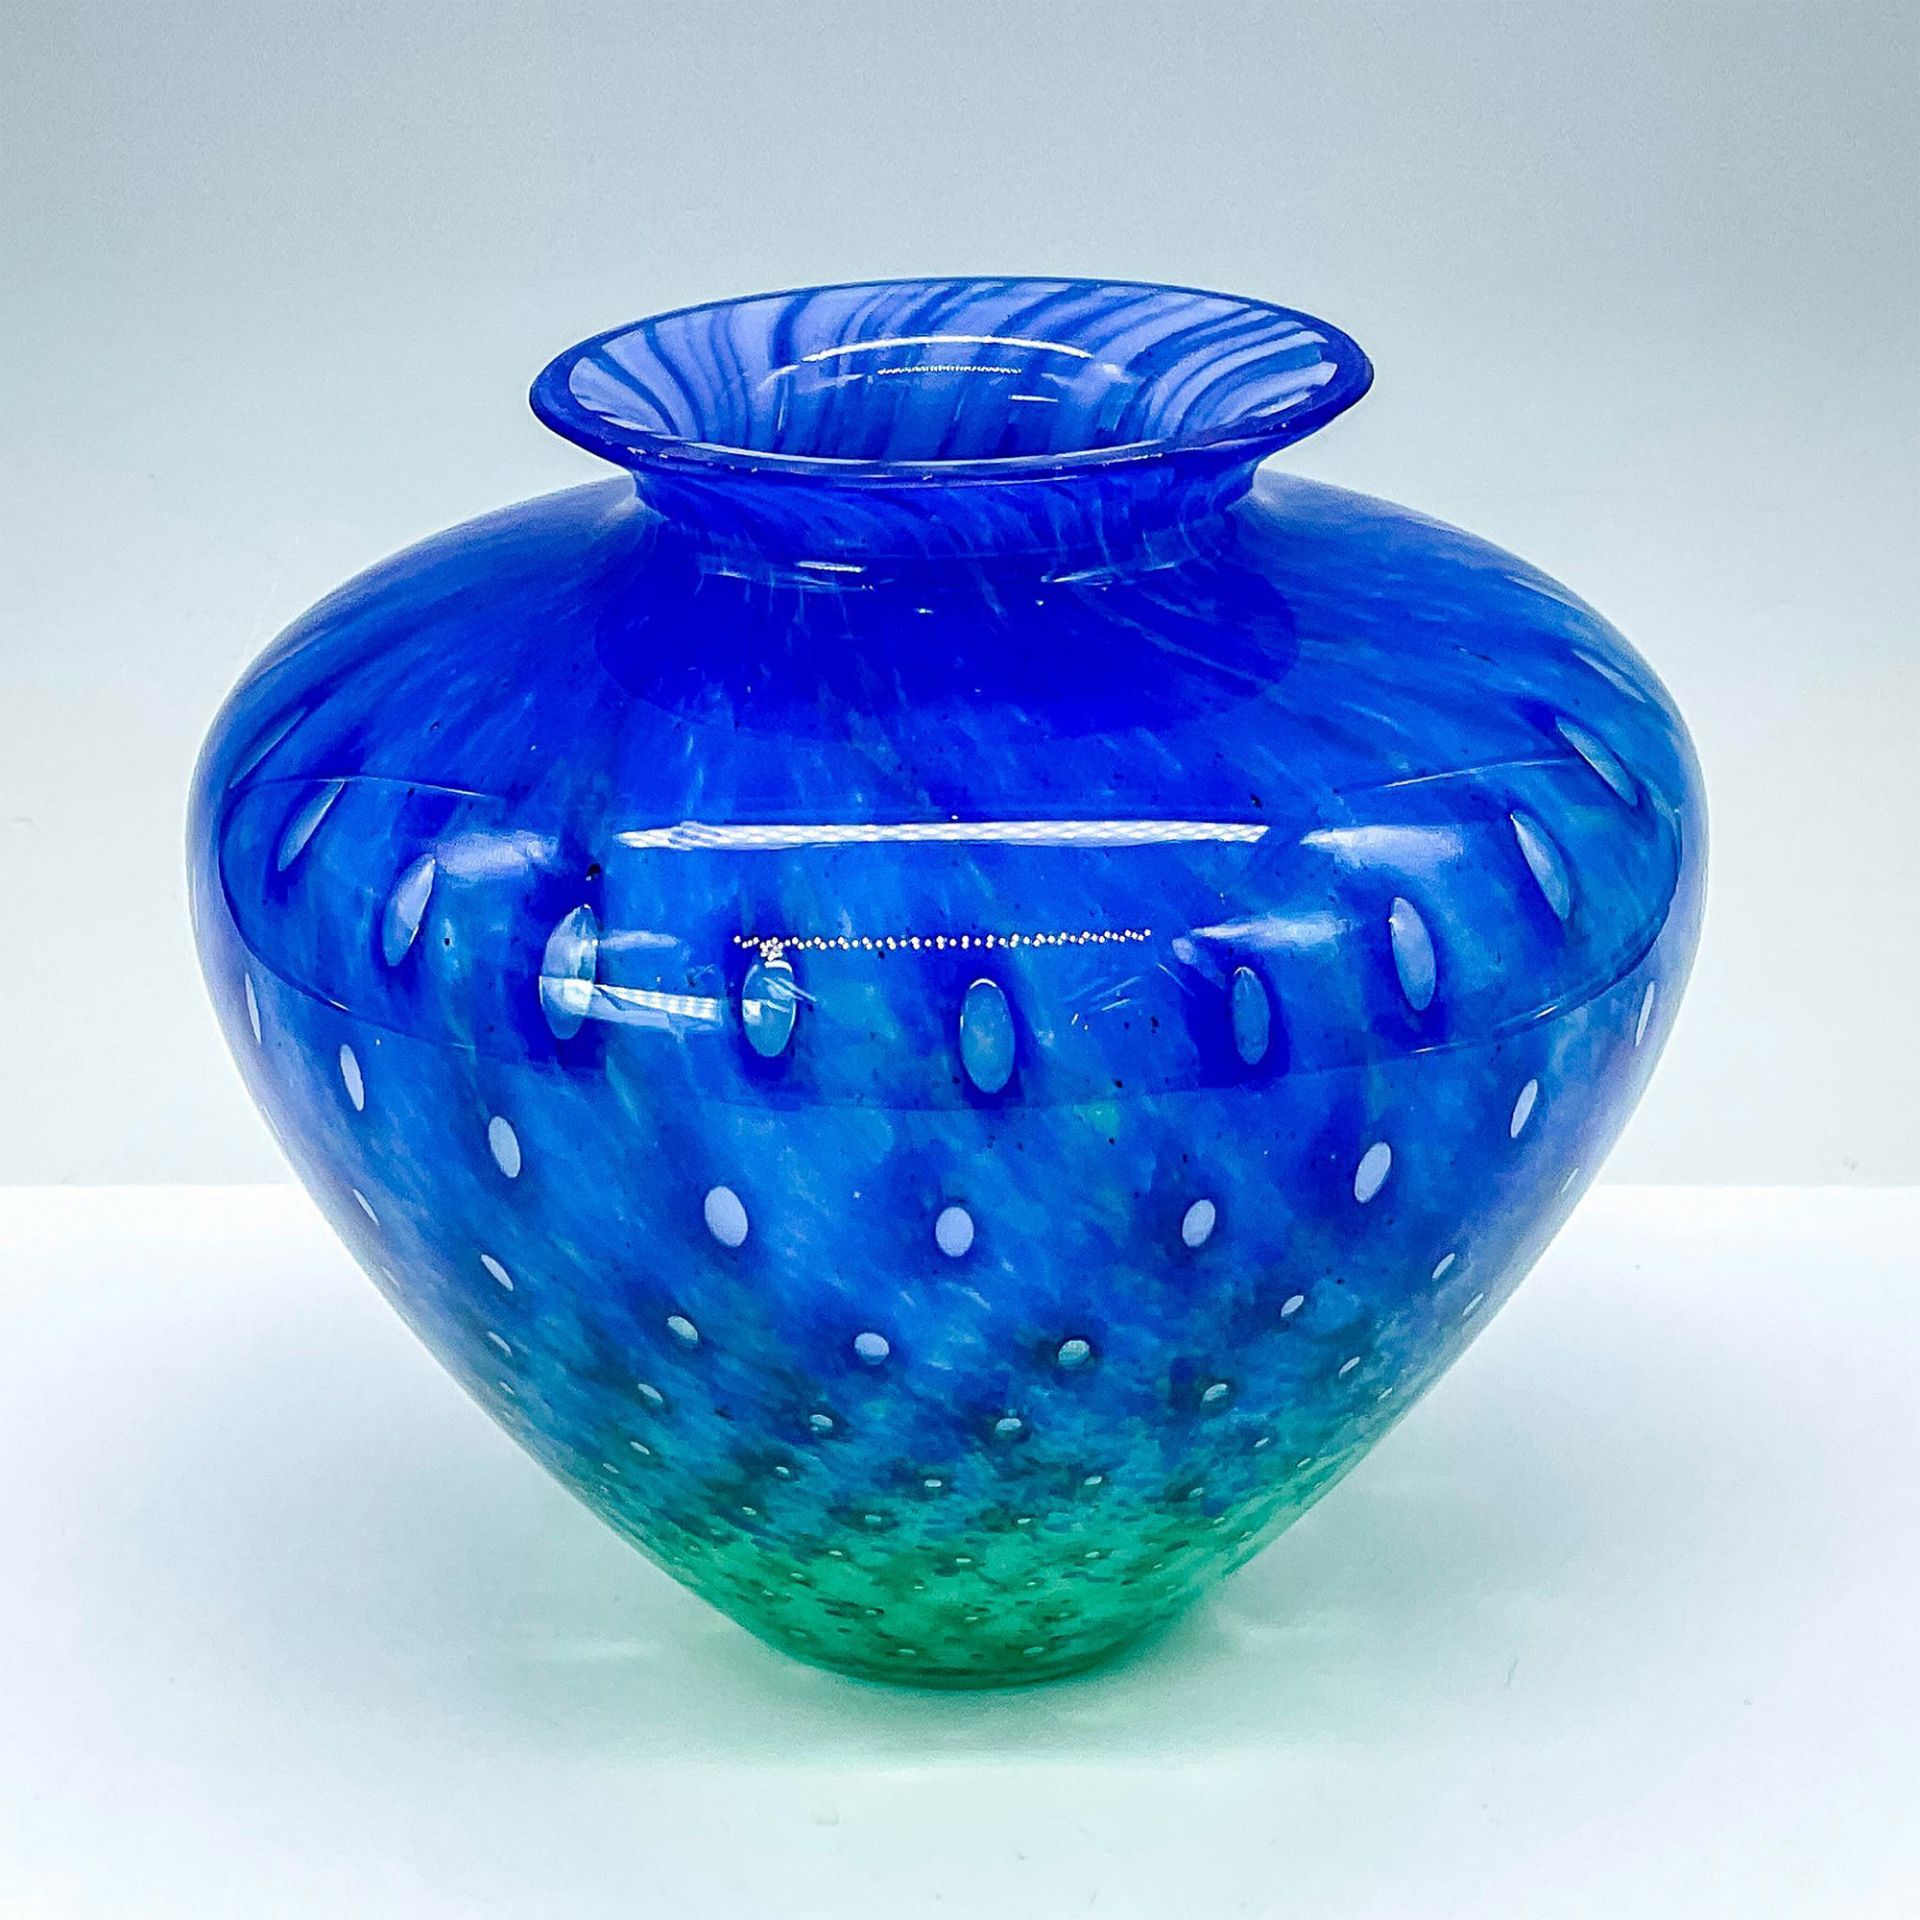 Blue and Green Art Glass Vase - Image 2 of 3